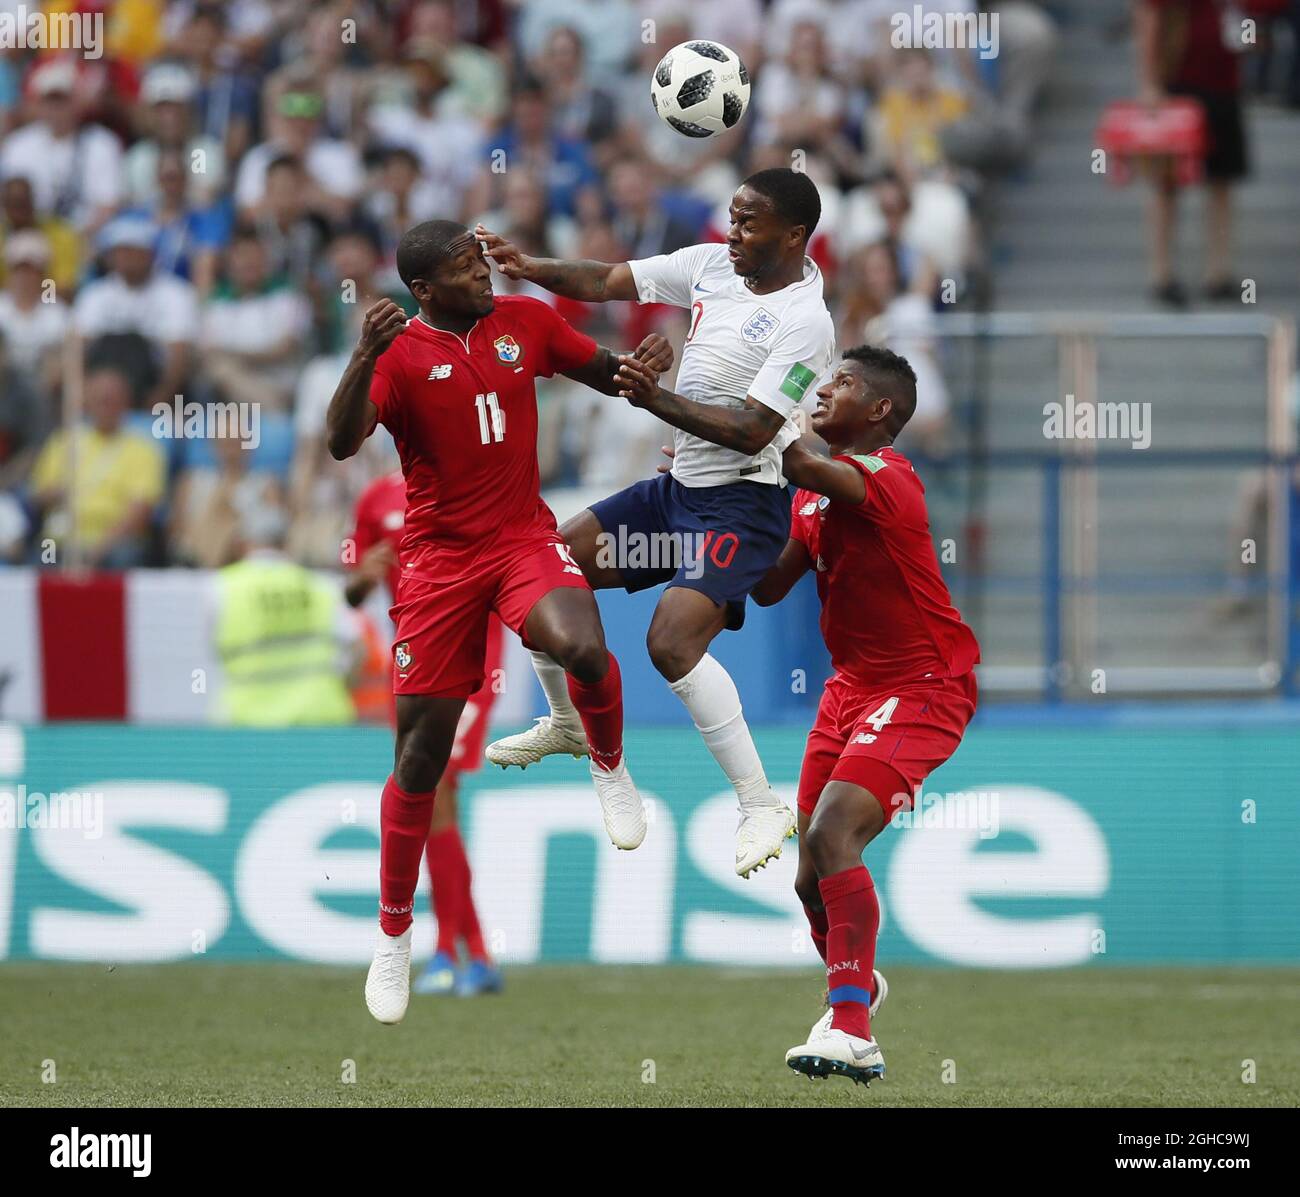 Raheem Sterling of England tussles with Armando Cooper of Panama during the FIFA World Cup 2018 Group G match at the Nizhny Novgorod Stadium, Nizhny Novgorod. Picture date 24th June 2018. Picture credit should read: David Klein/Sportimage via PA Images Stock Photo